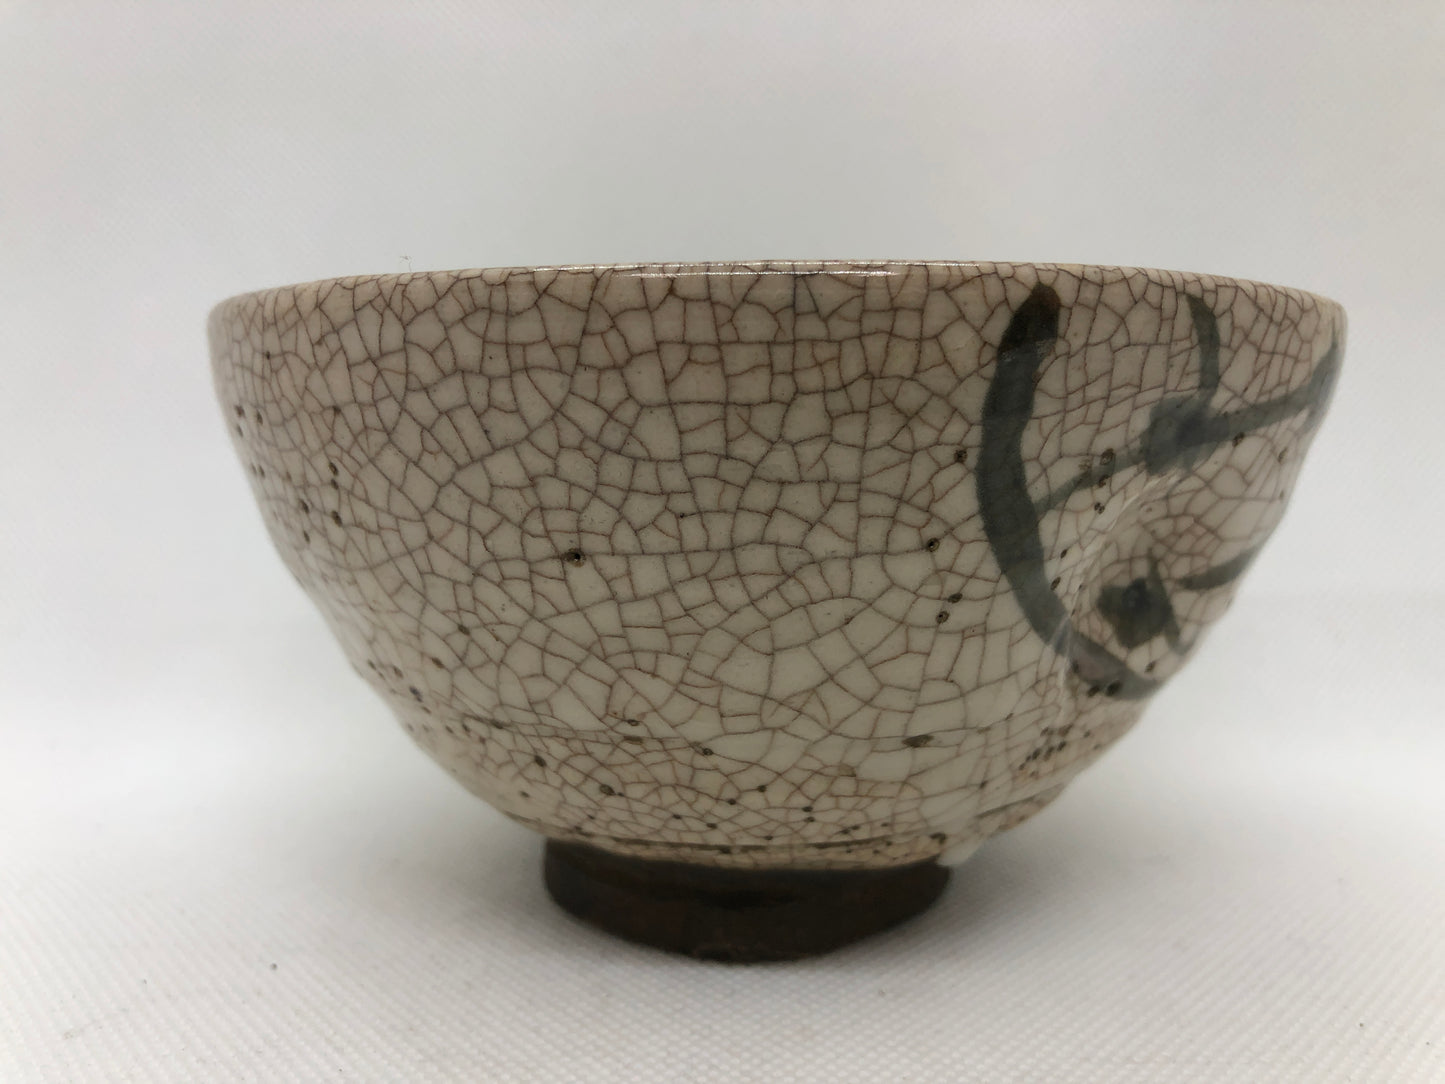 Y4468 CHAWAN Mino-ware signed Japan antique pottery bowl cup vessel container